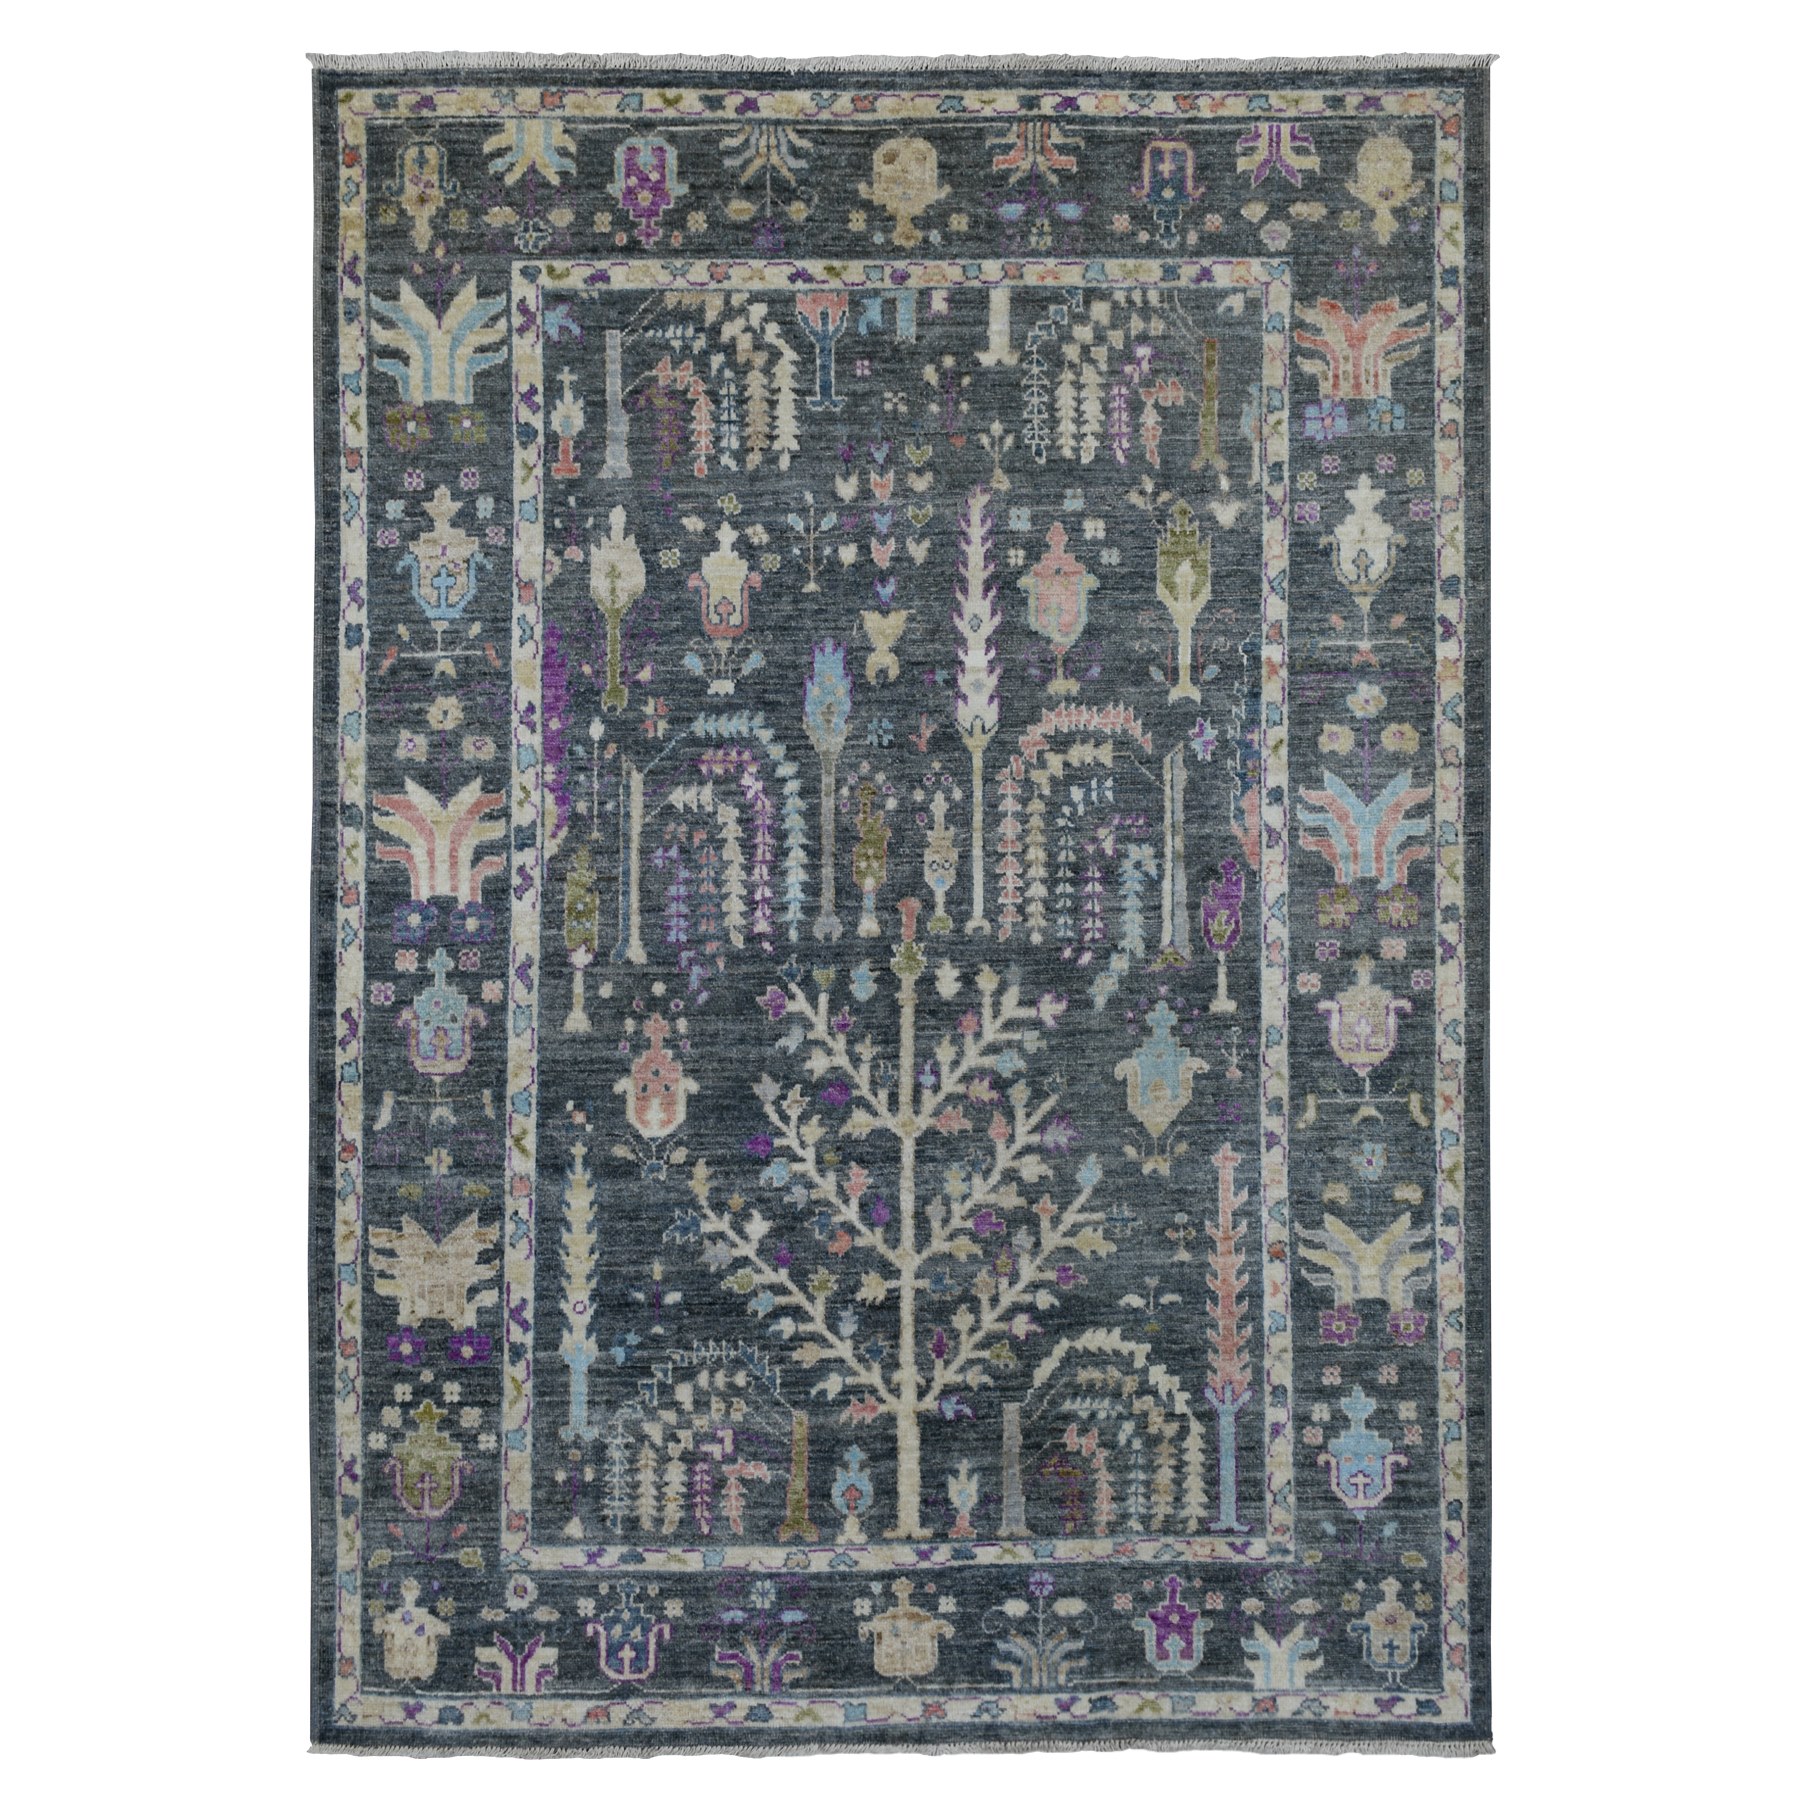 6'4"x8'9" Hand Woven Charcoal Gray Angora Oushak Willow and Cypress Tree Design Soft Velvety Wool Oriental Rug 